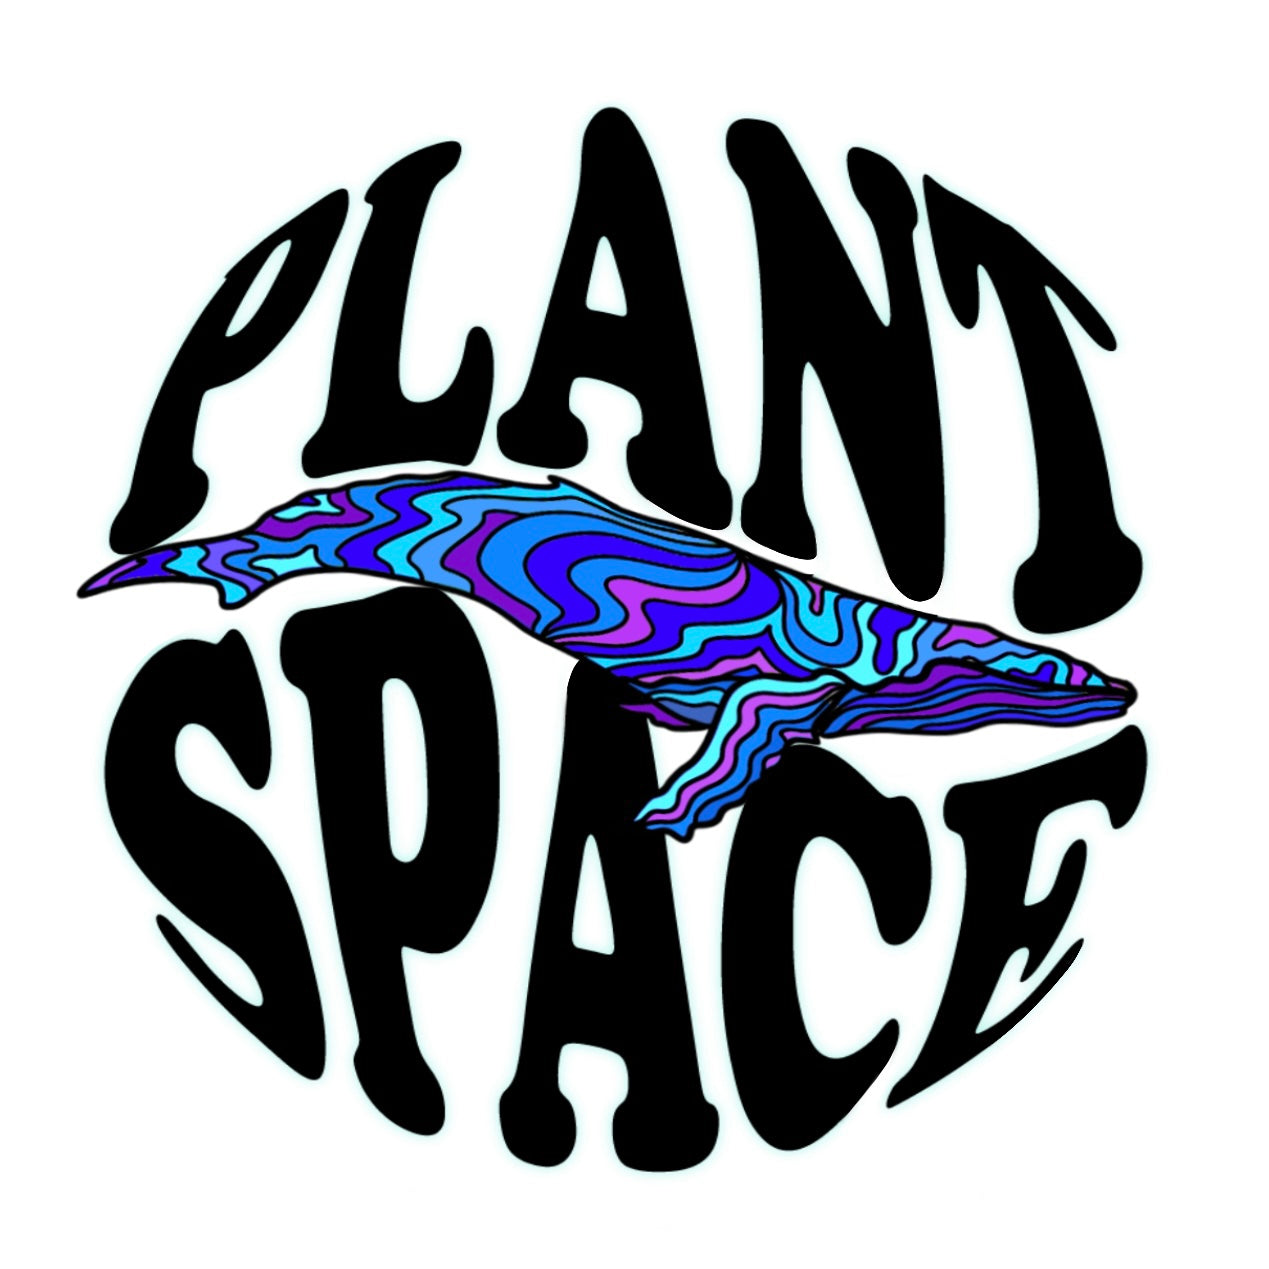 Plant Space